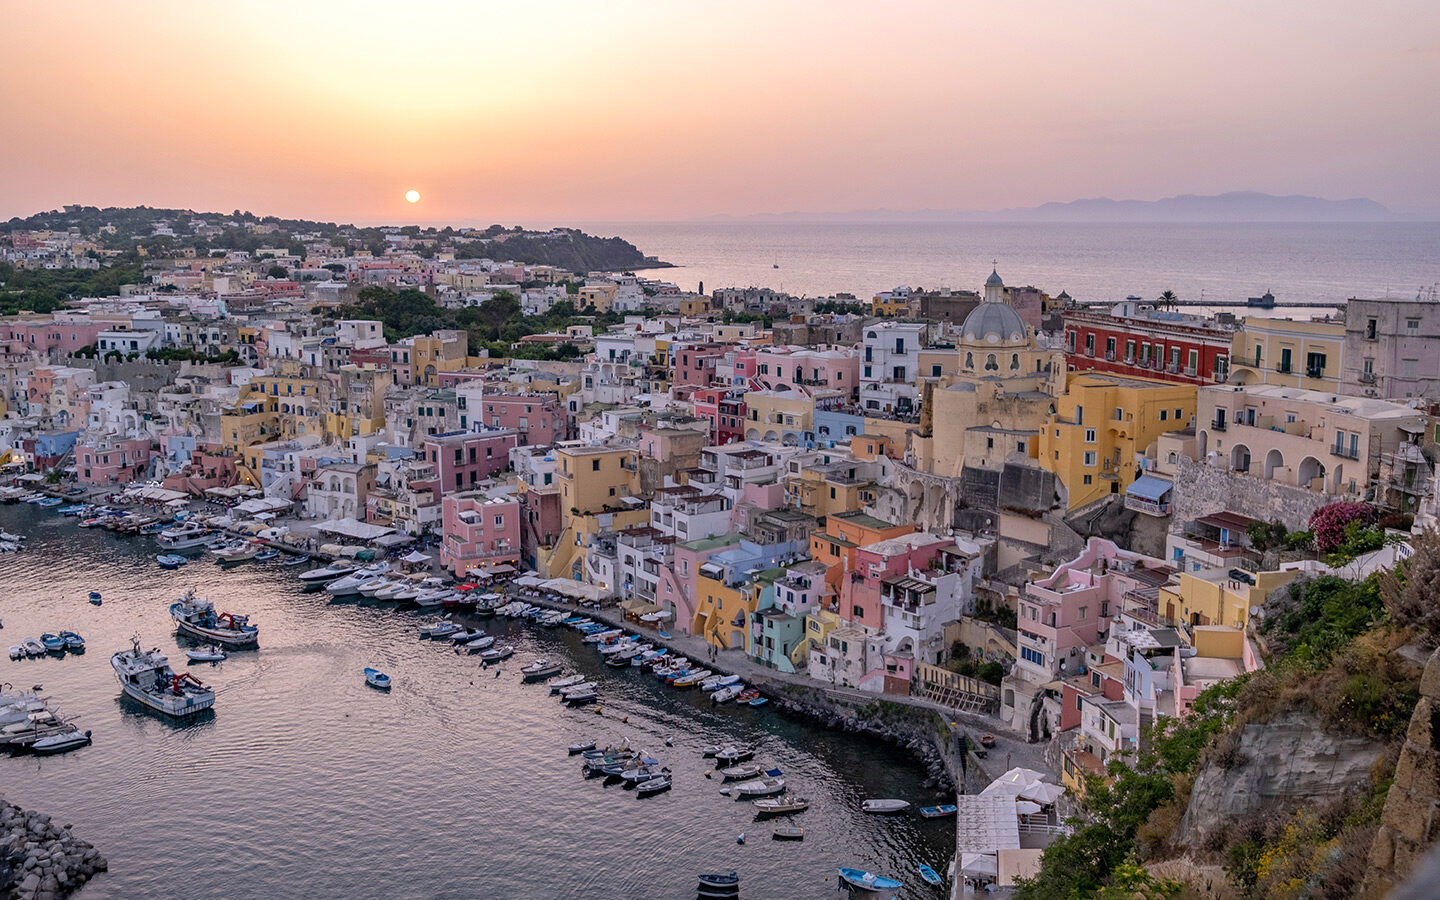 Sunset views from the Panoramica sulla Corricella viewpoint in Procida